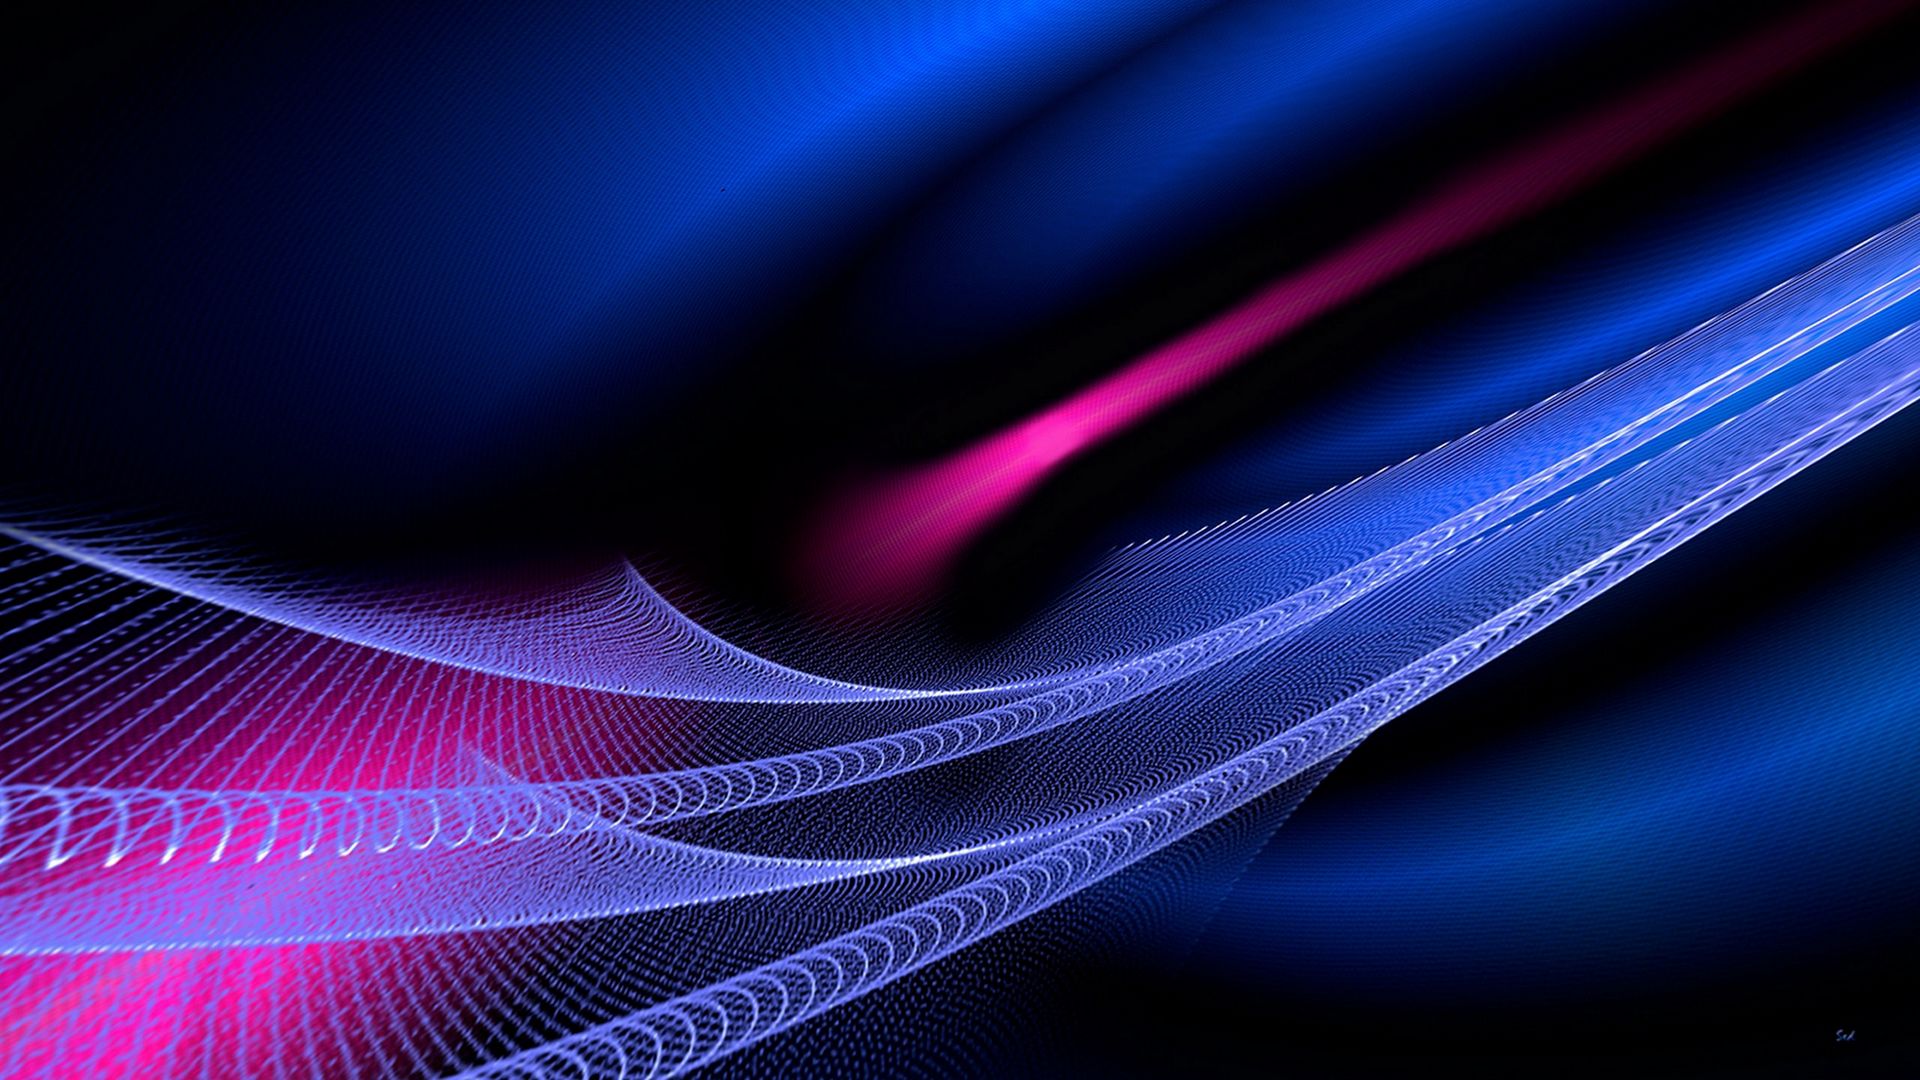 Download wallpaper 1920x1080 mesh, abstract, background, color full hd,  hdtv, fhd, 1080p hd background